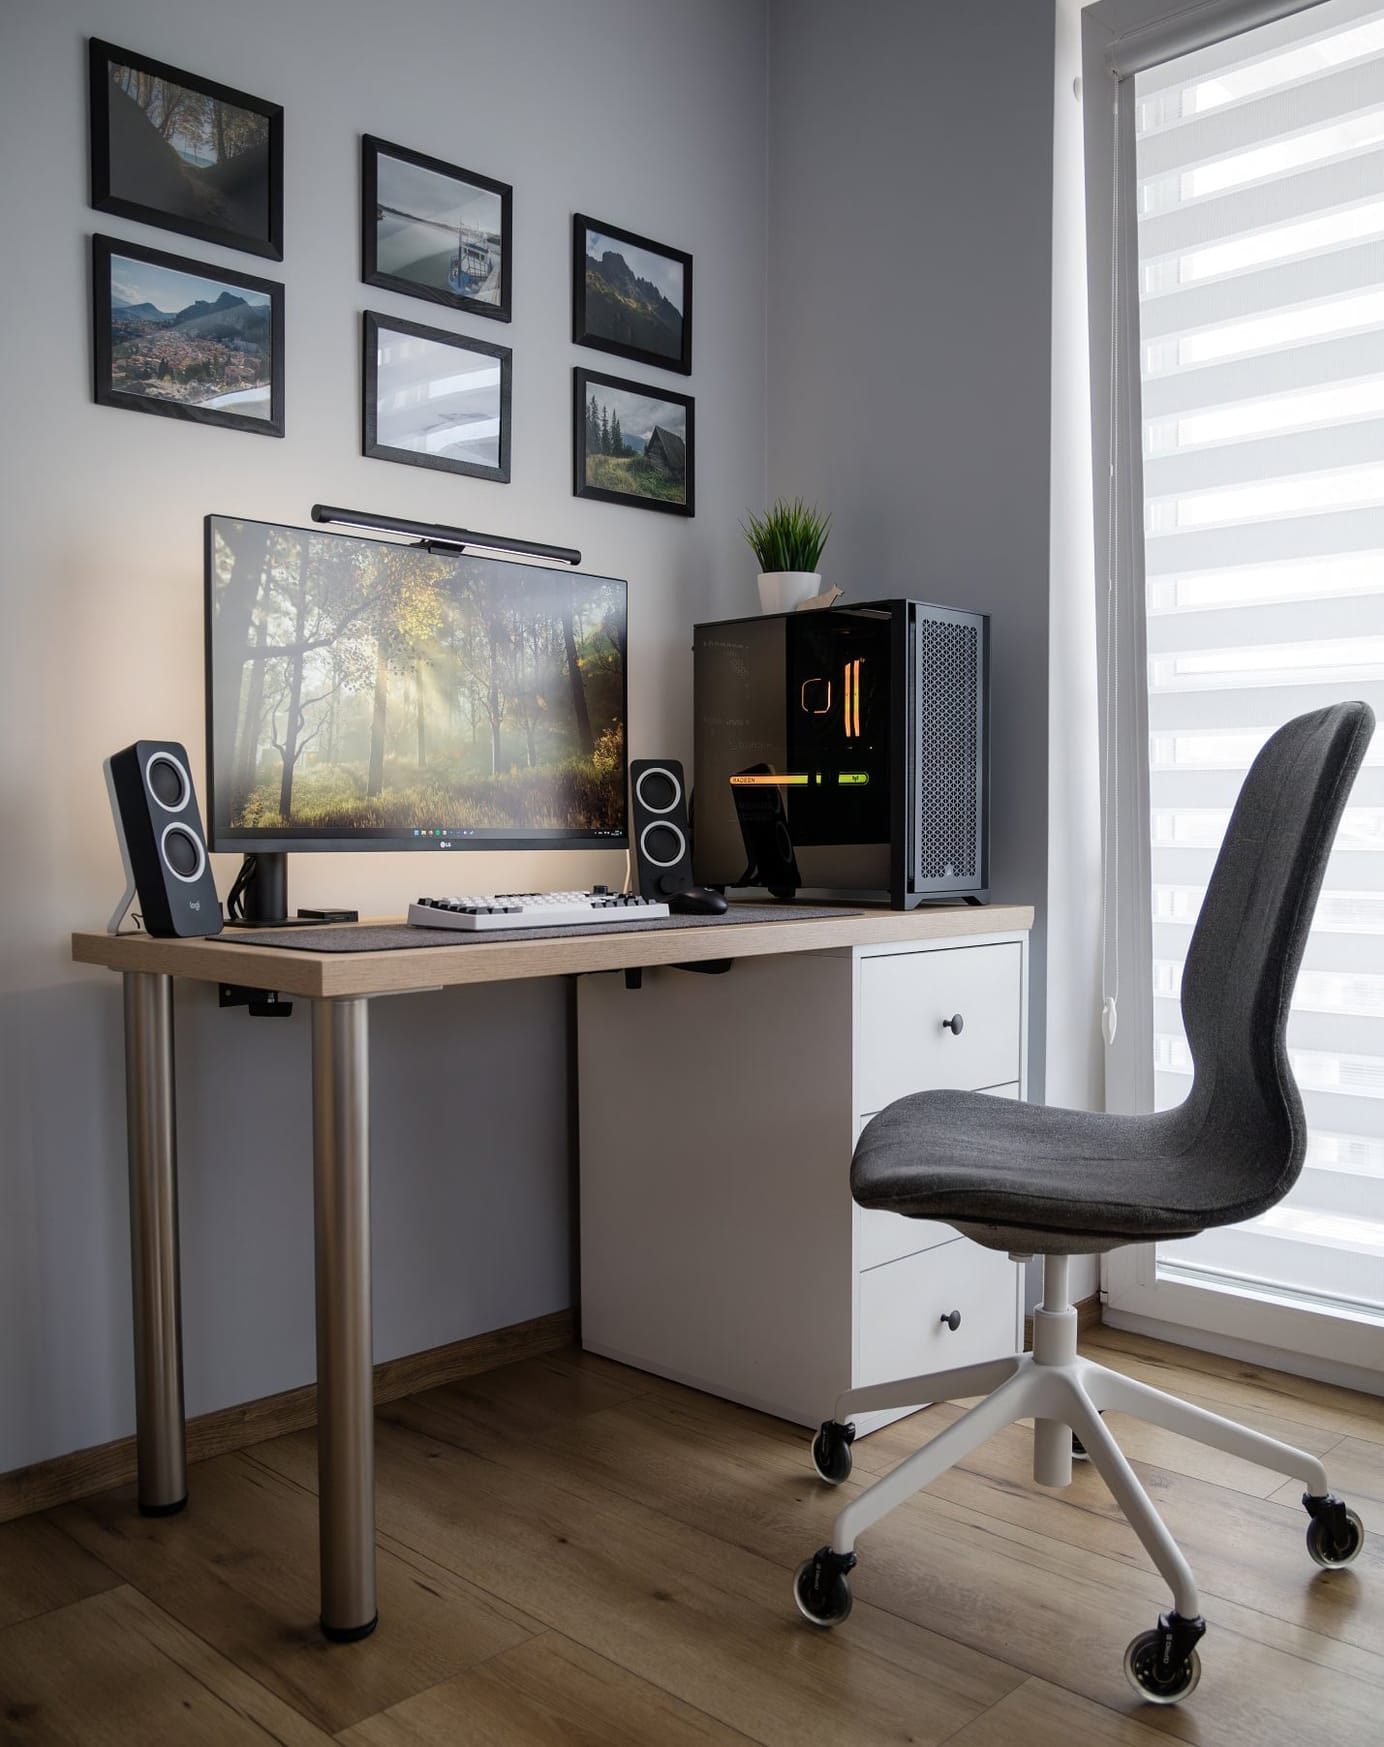 A Modern Home Office Setup with Computer on Desk with a Window